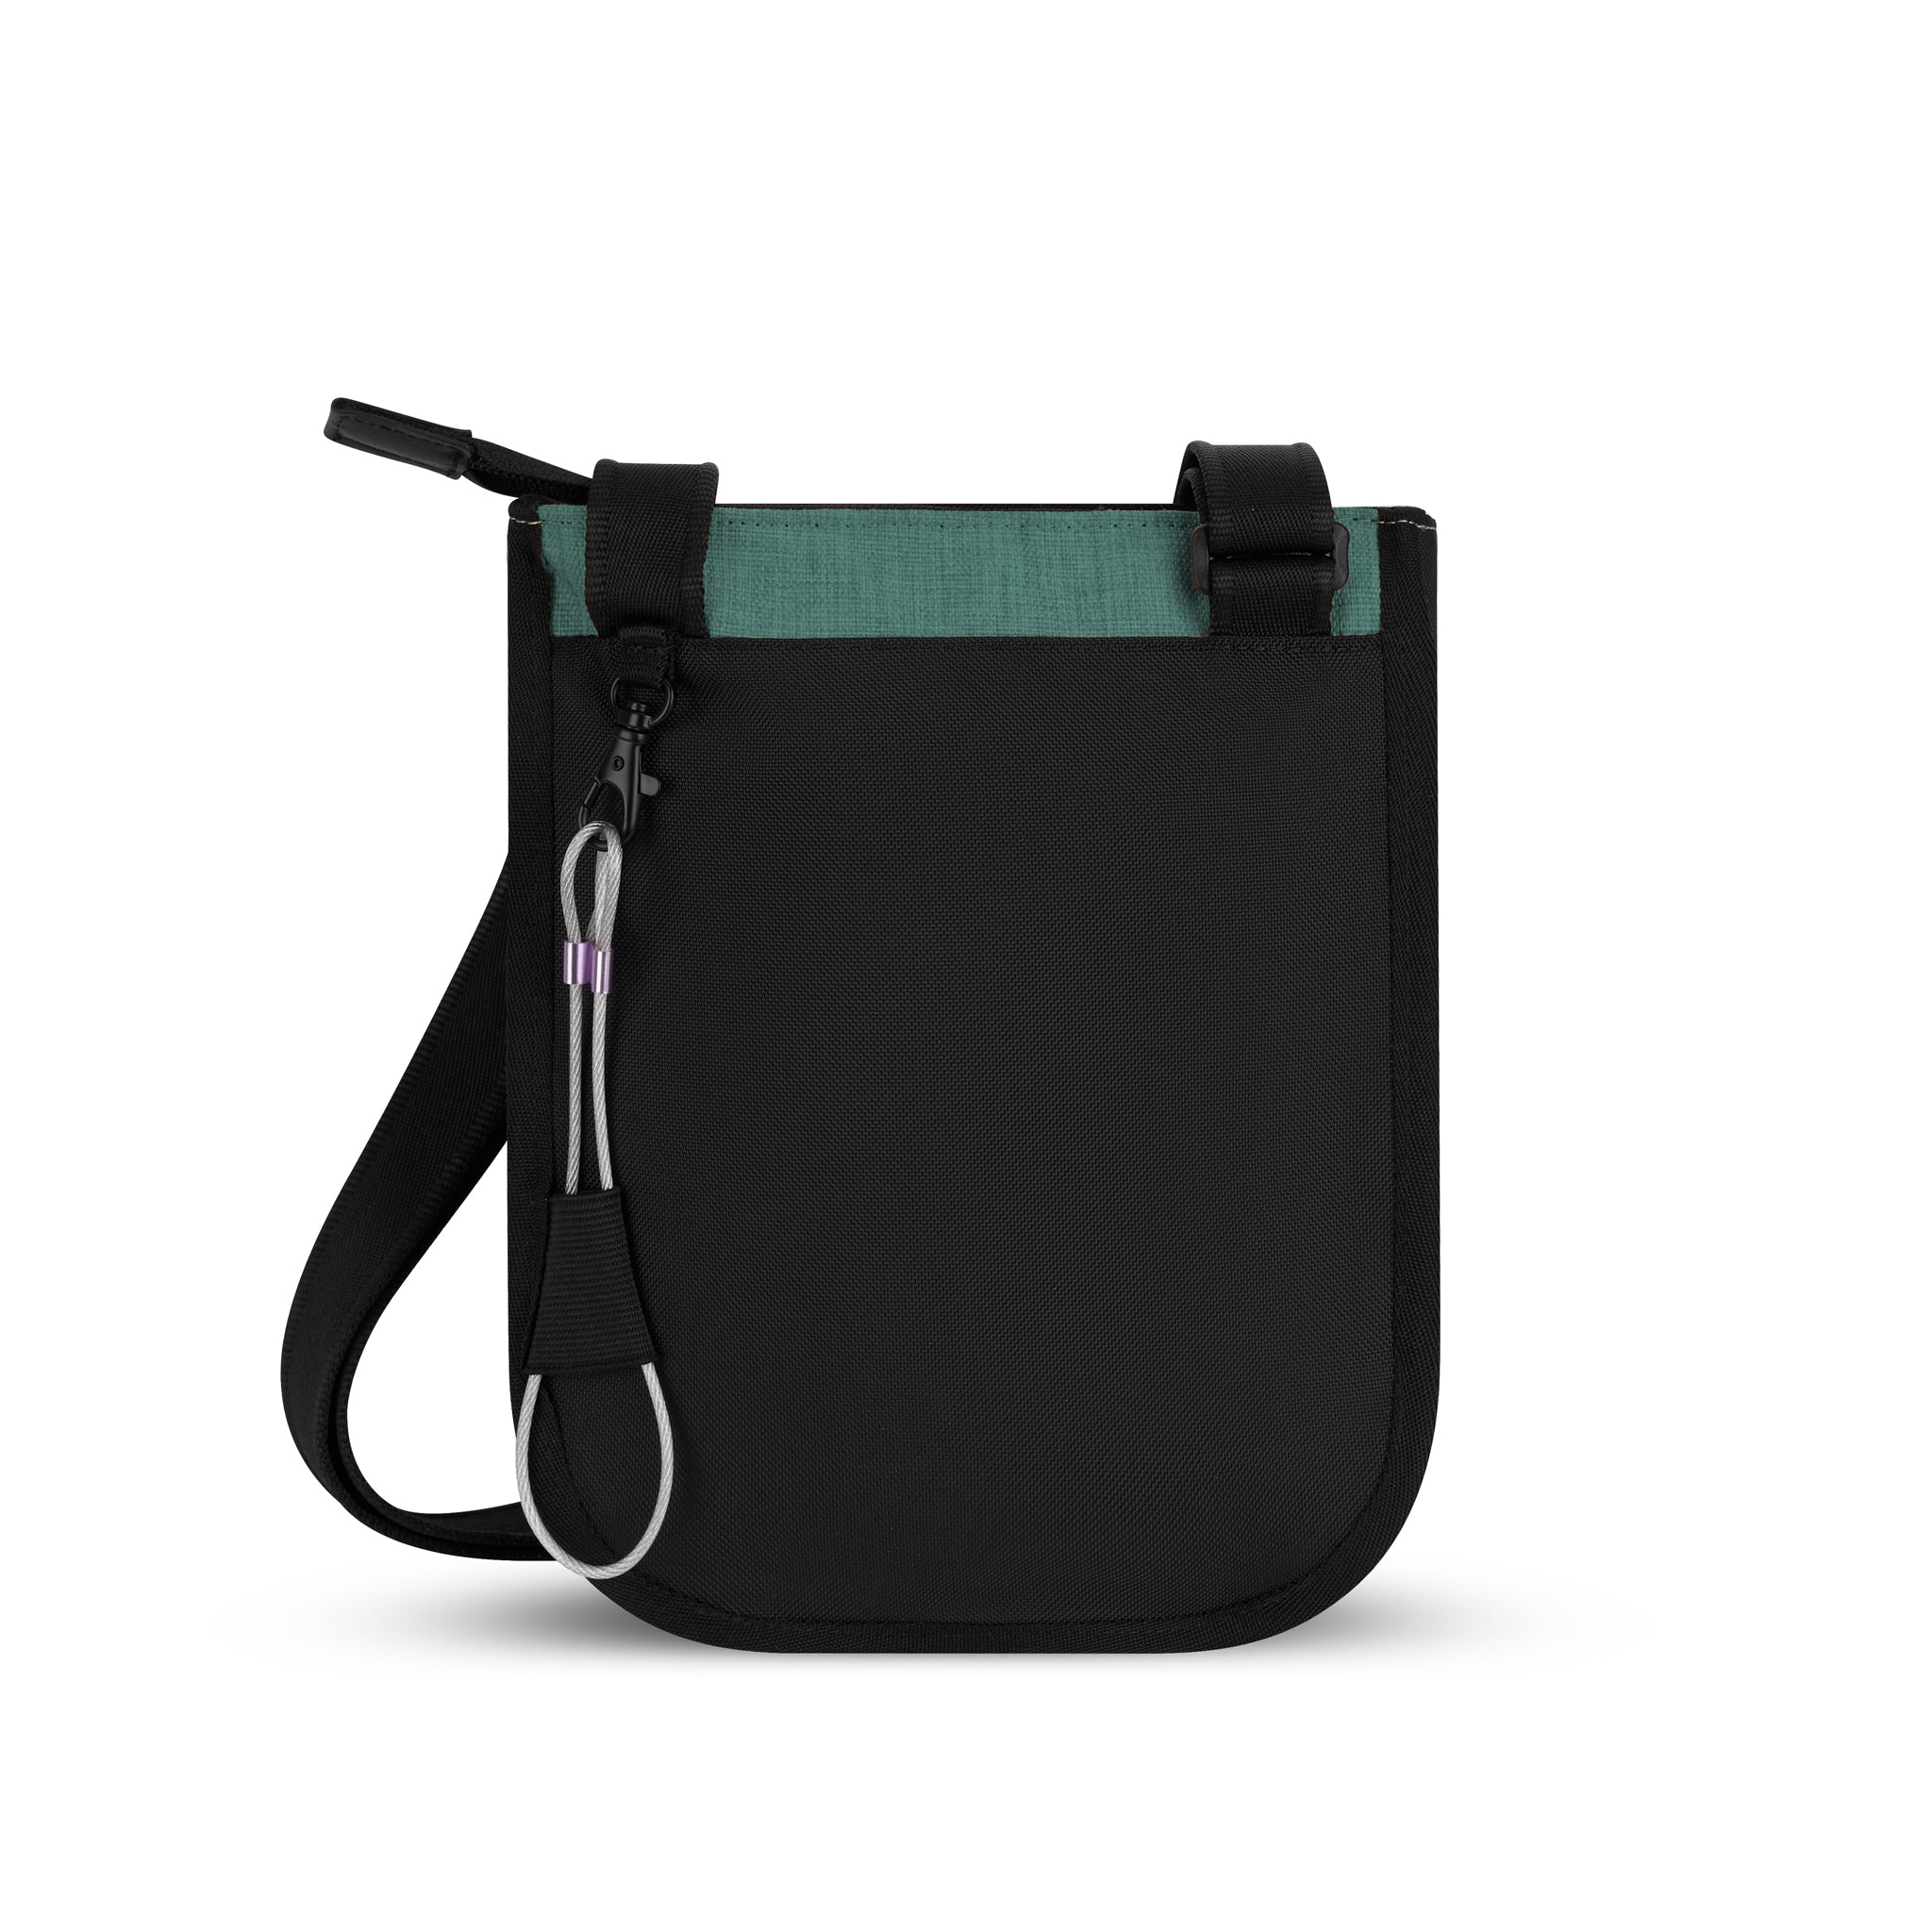 Back view of Sherpani's Anti-Theft bag, the Prima AT in Teal, with vegan leather accents in black. There is an external pouch on the back of the bag, and a chair loop lock clipped to the left side that is secured in place with an elastic tab. 